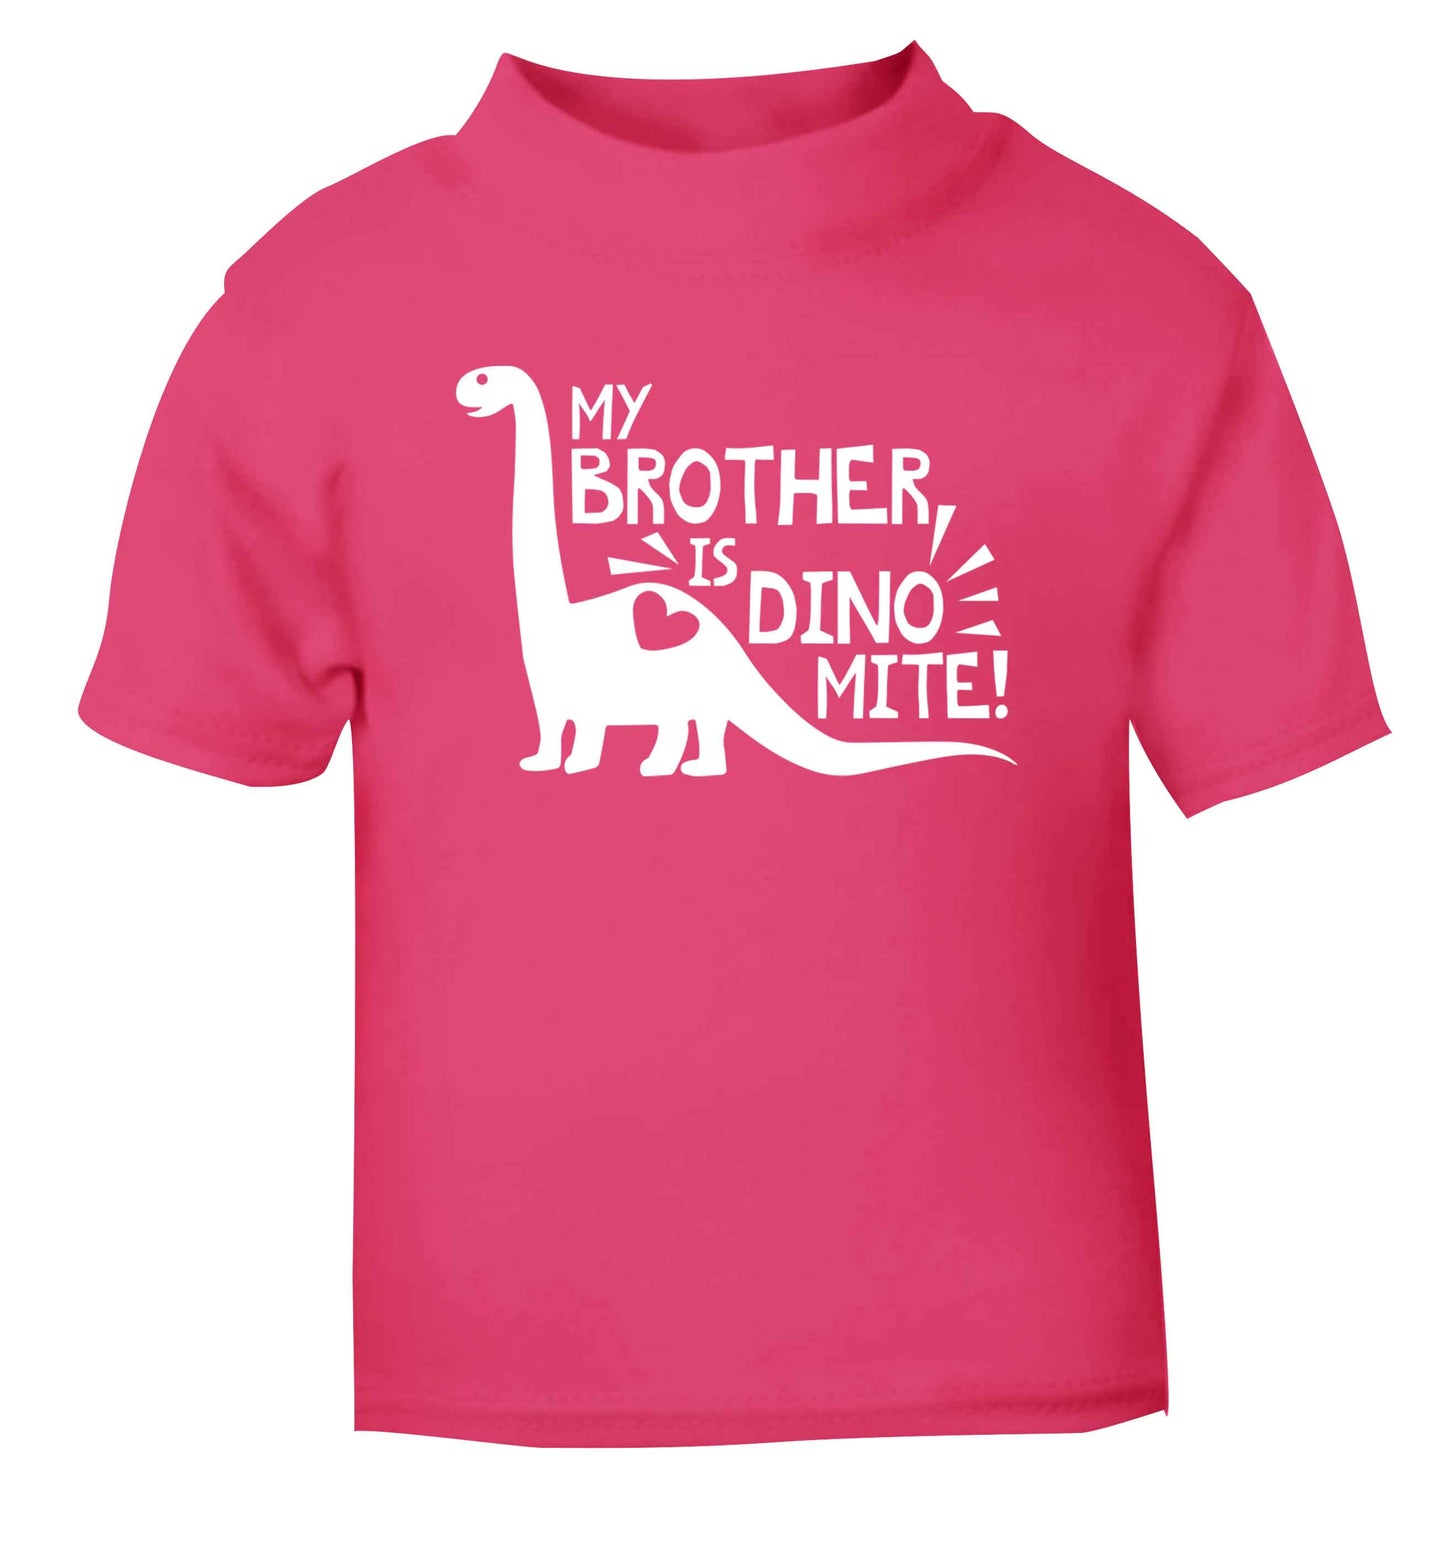 My brother is dinomite! pink Baby Toddler Tshirt 2 Years